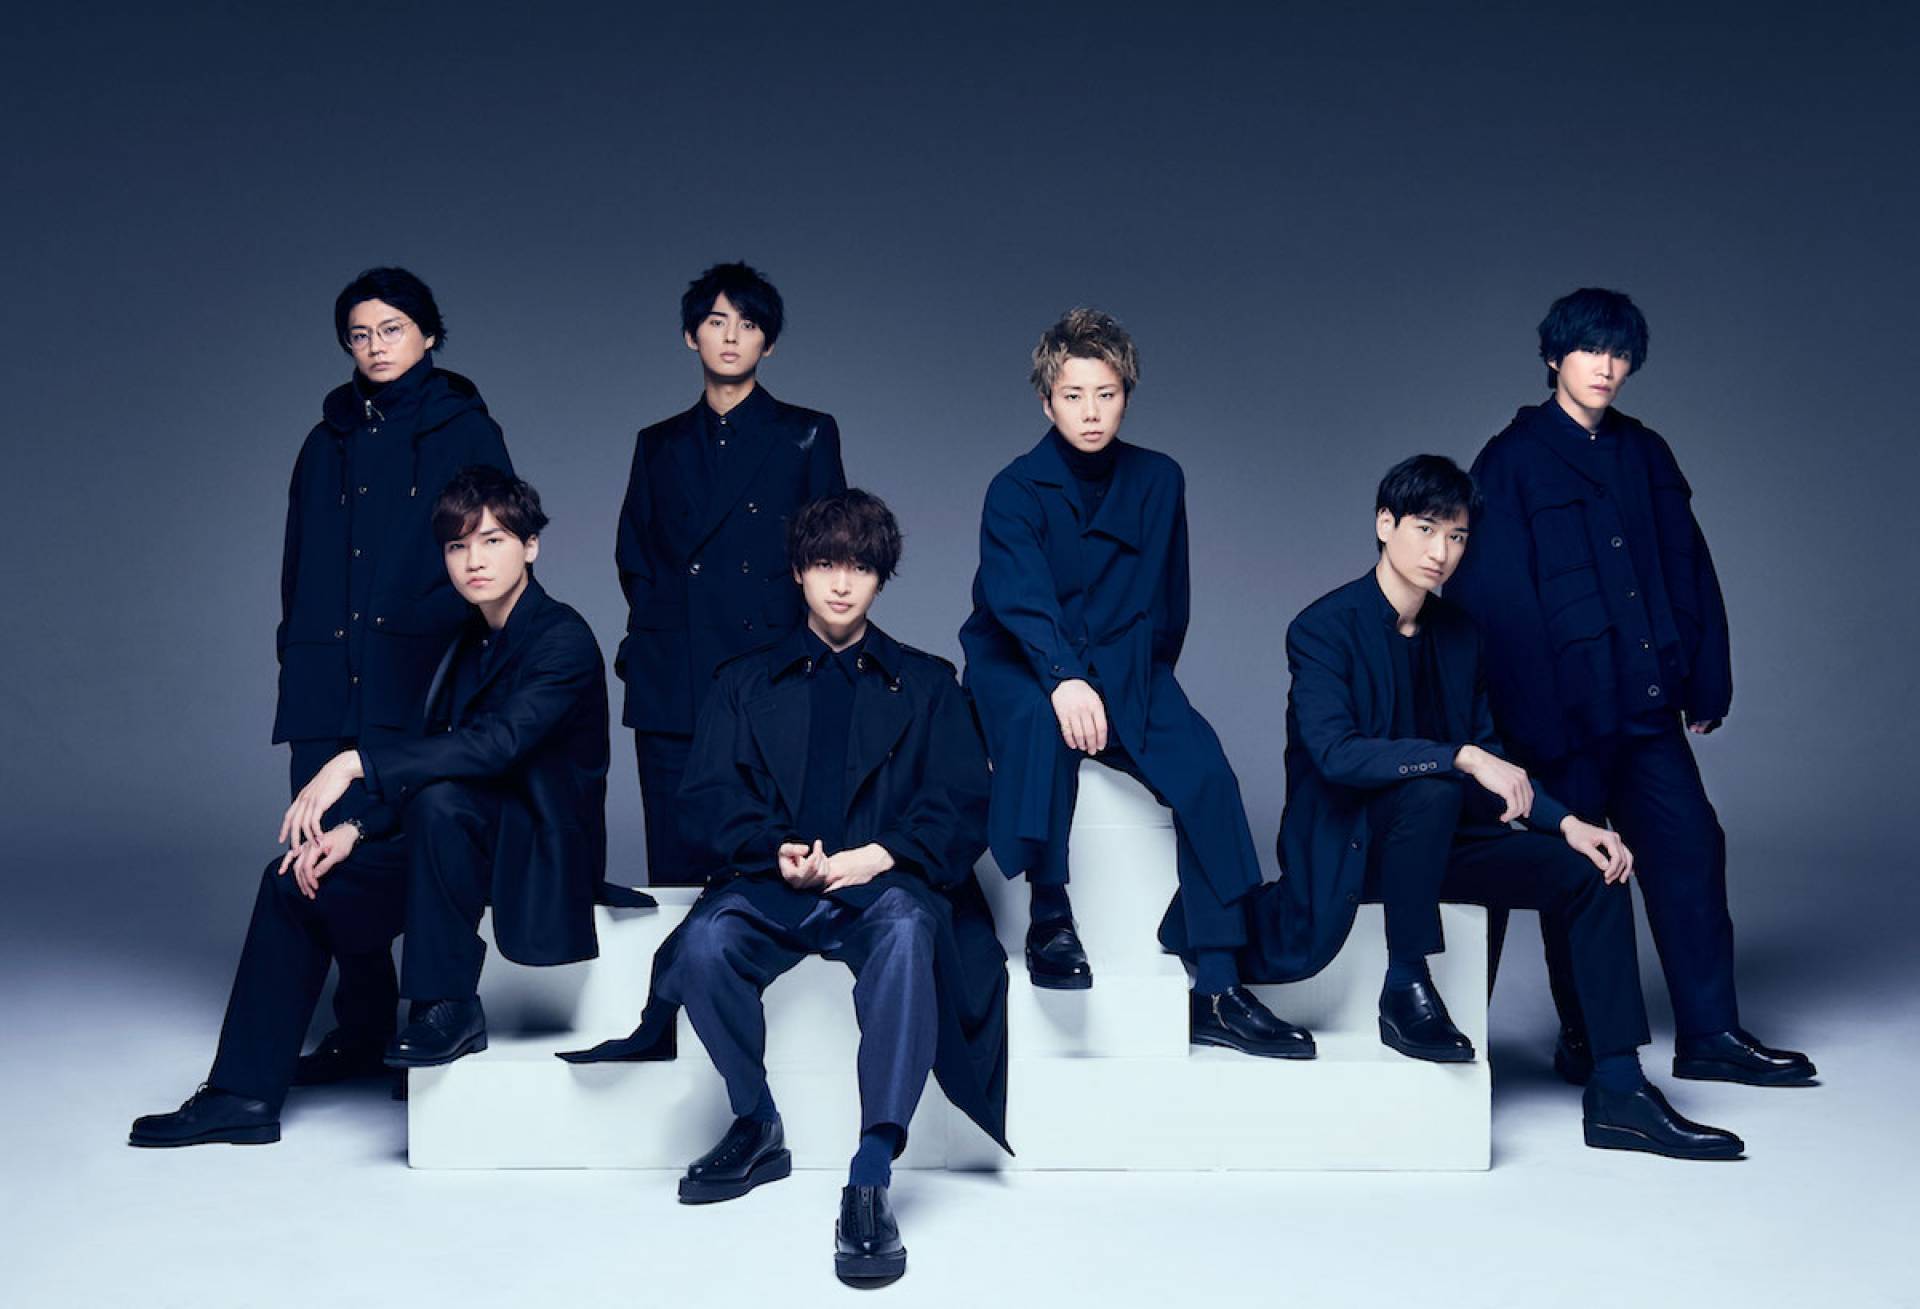 Kis-My-Ft2 Members Premiere Solo Music Videos on YouTube